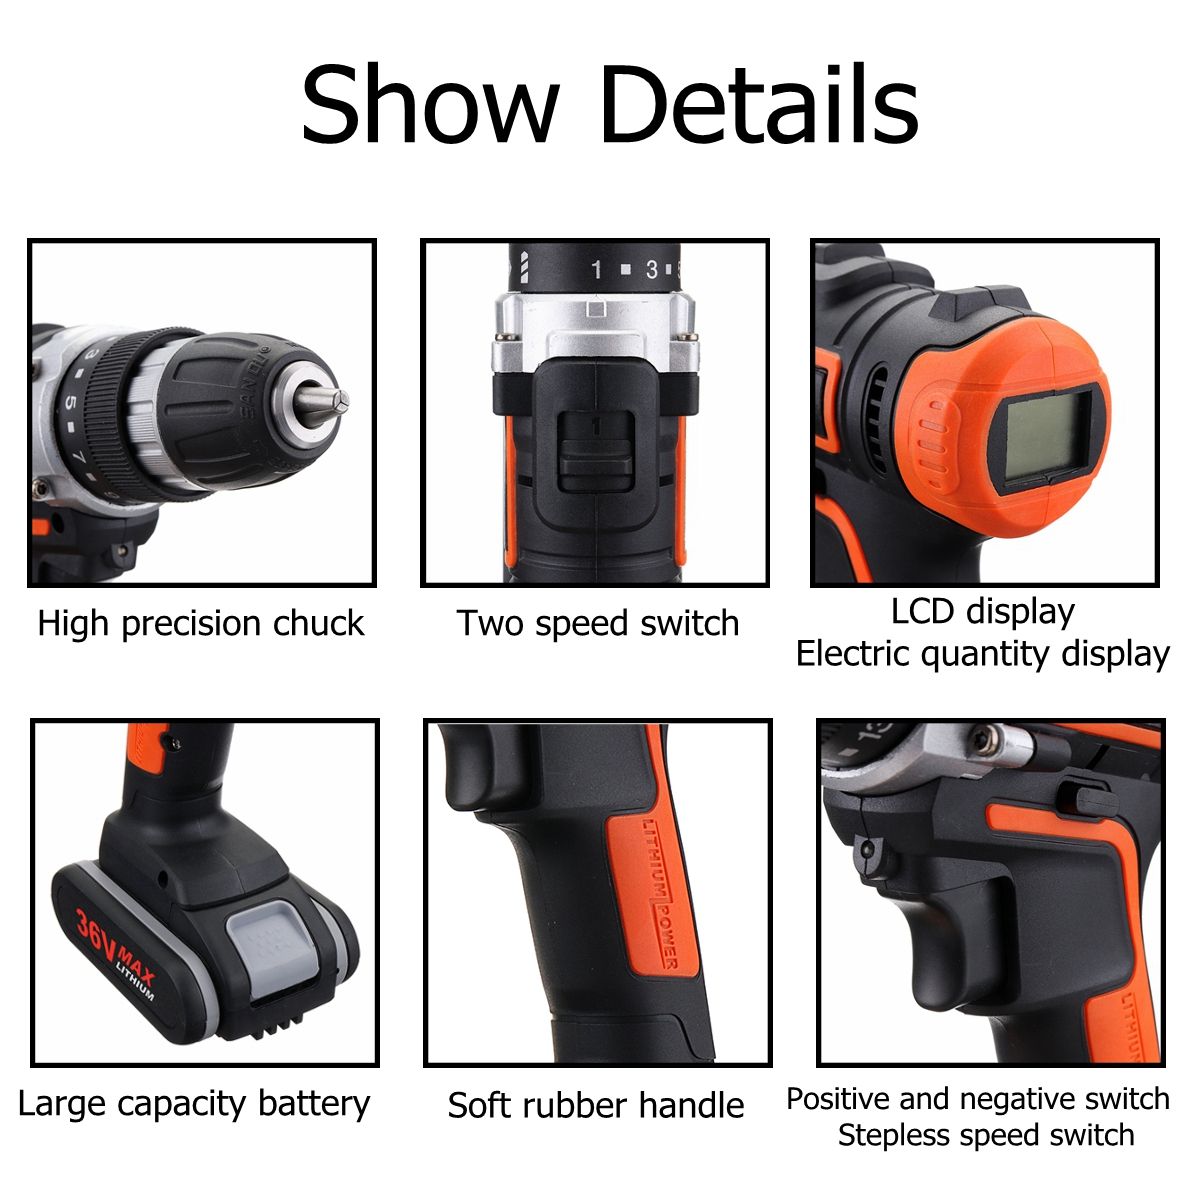 36V-LED-Light-Cordless-Electric-Drill-2-Speed-Digital-Display-Lithium-Battery-Household-Power-Drills-1410427